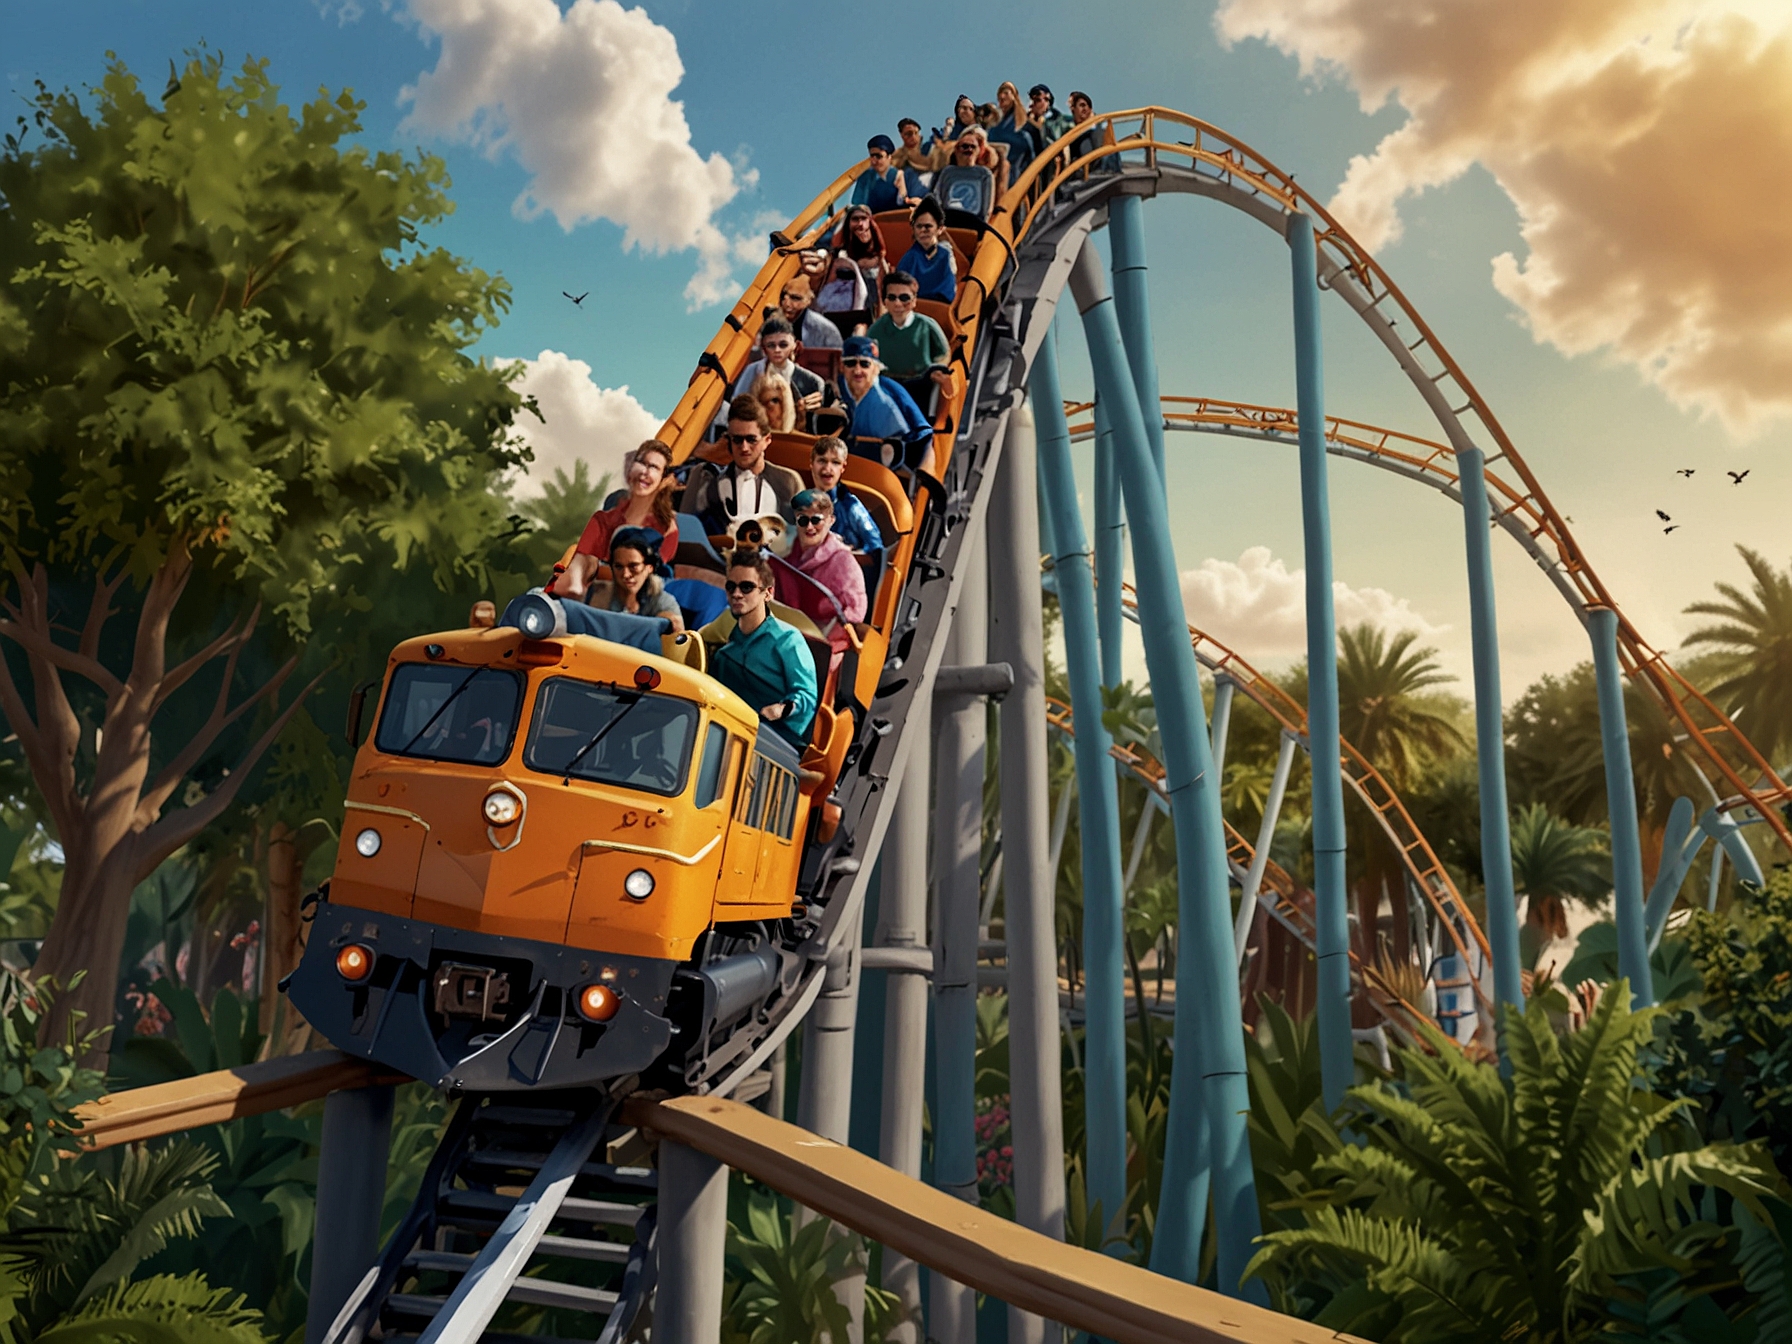 A thrilling roller coaster at the new Orlando theme park, showing a train of riders experiencing high-speed twists and turns with lush landscaping in the background.